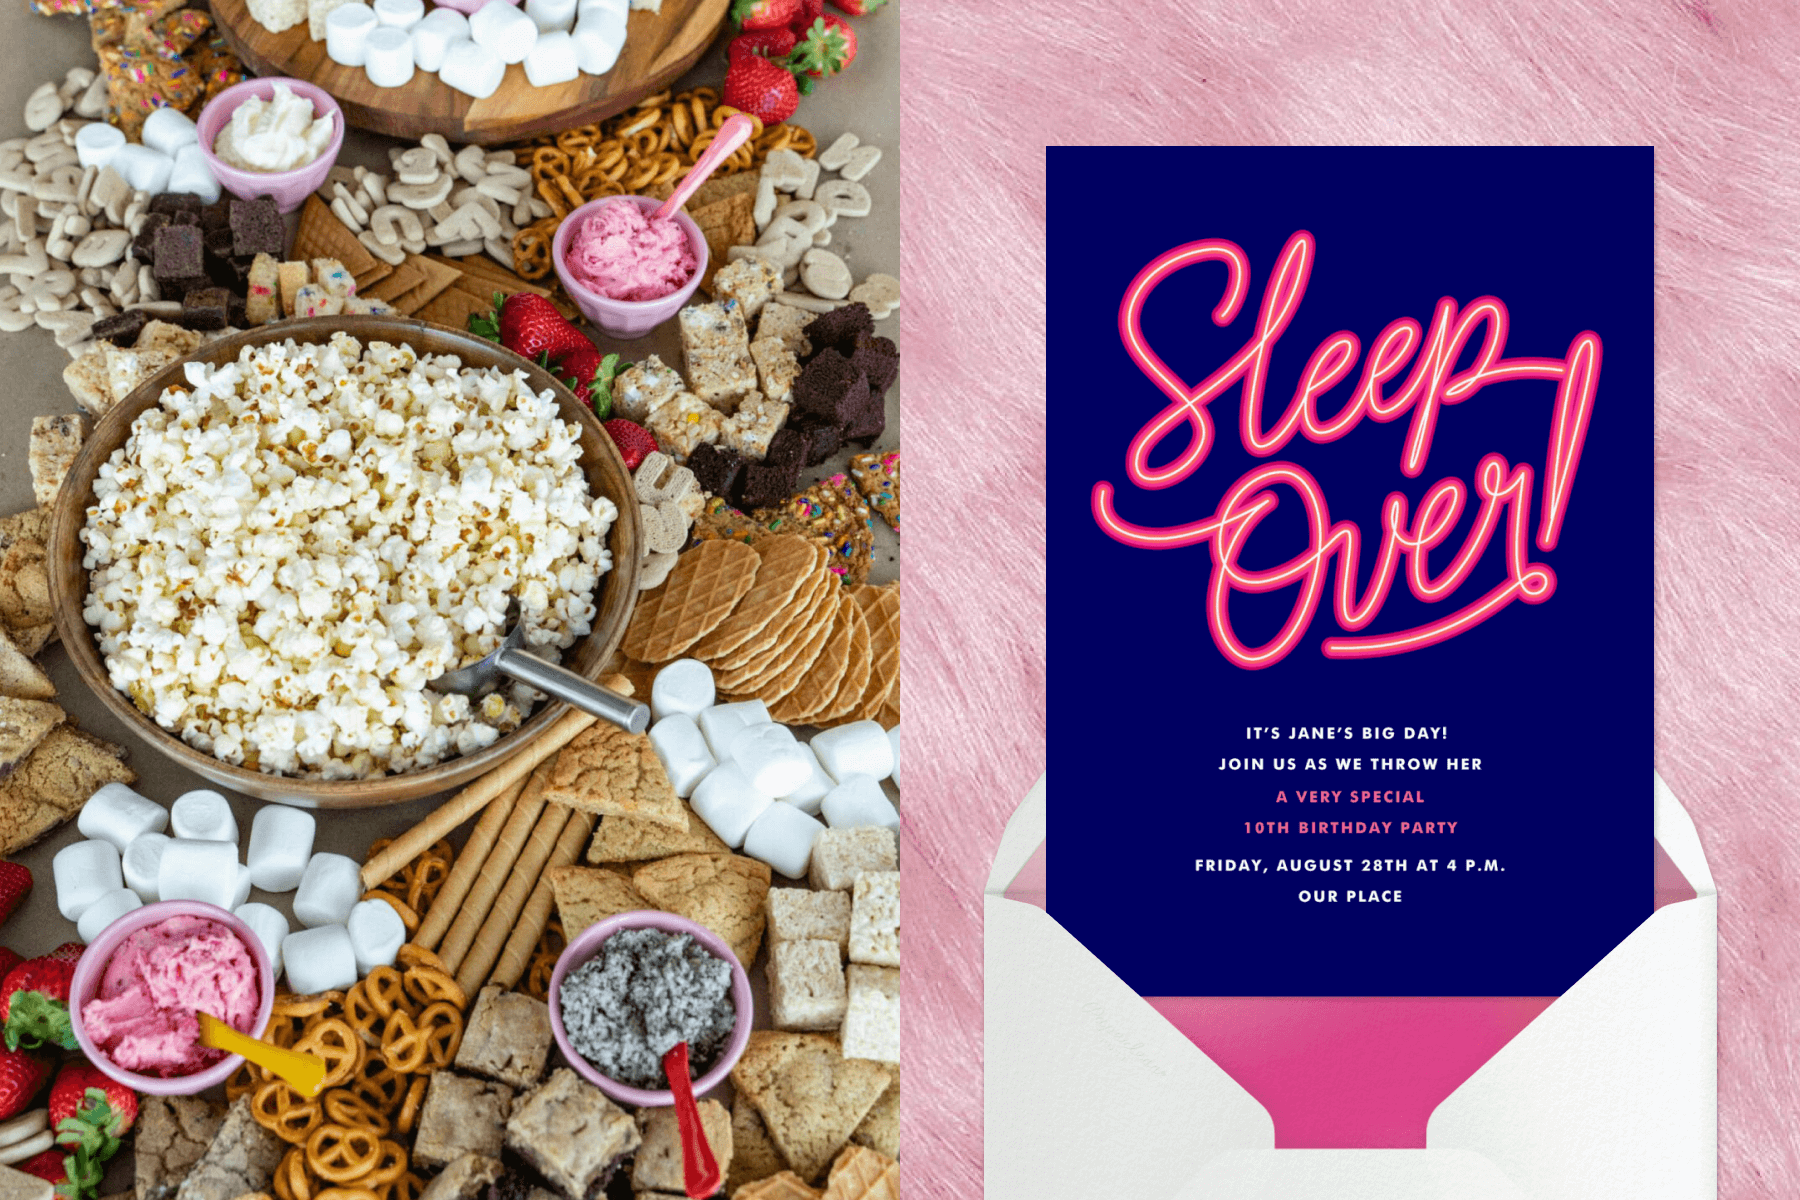 Left: A snacks table with popcorn, marshmallows, cookies, and pretzels; Right: A blue and pink invitation that reads “Sleep Over!”